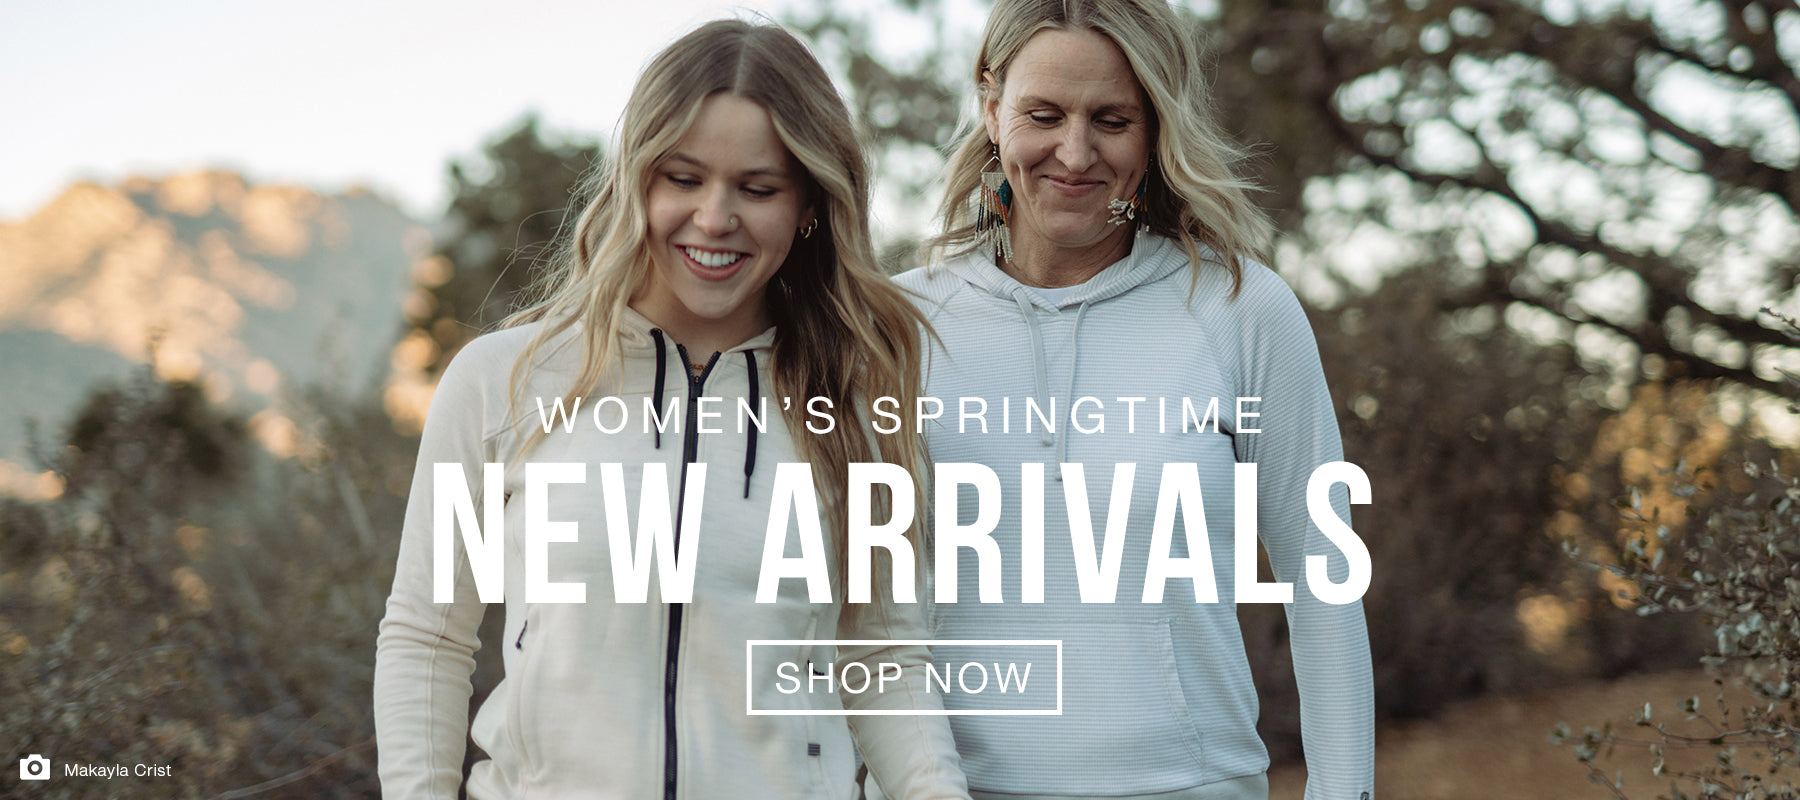 Shop Women's Springtime New Arrivals - A mother and daughter wearing hoodies while hiking a nature path with mountains in the background.